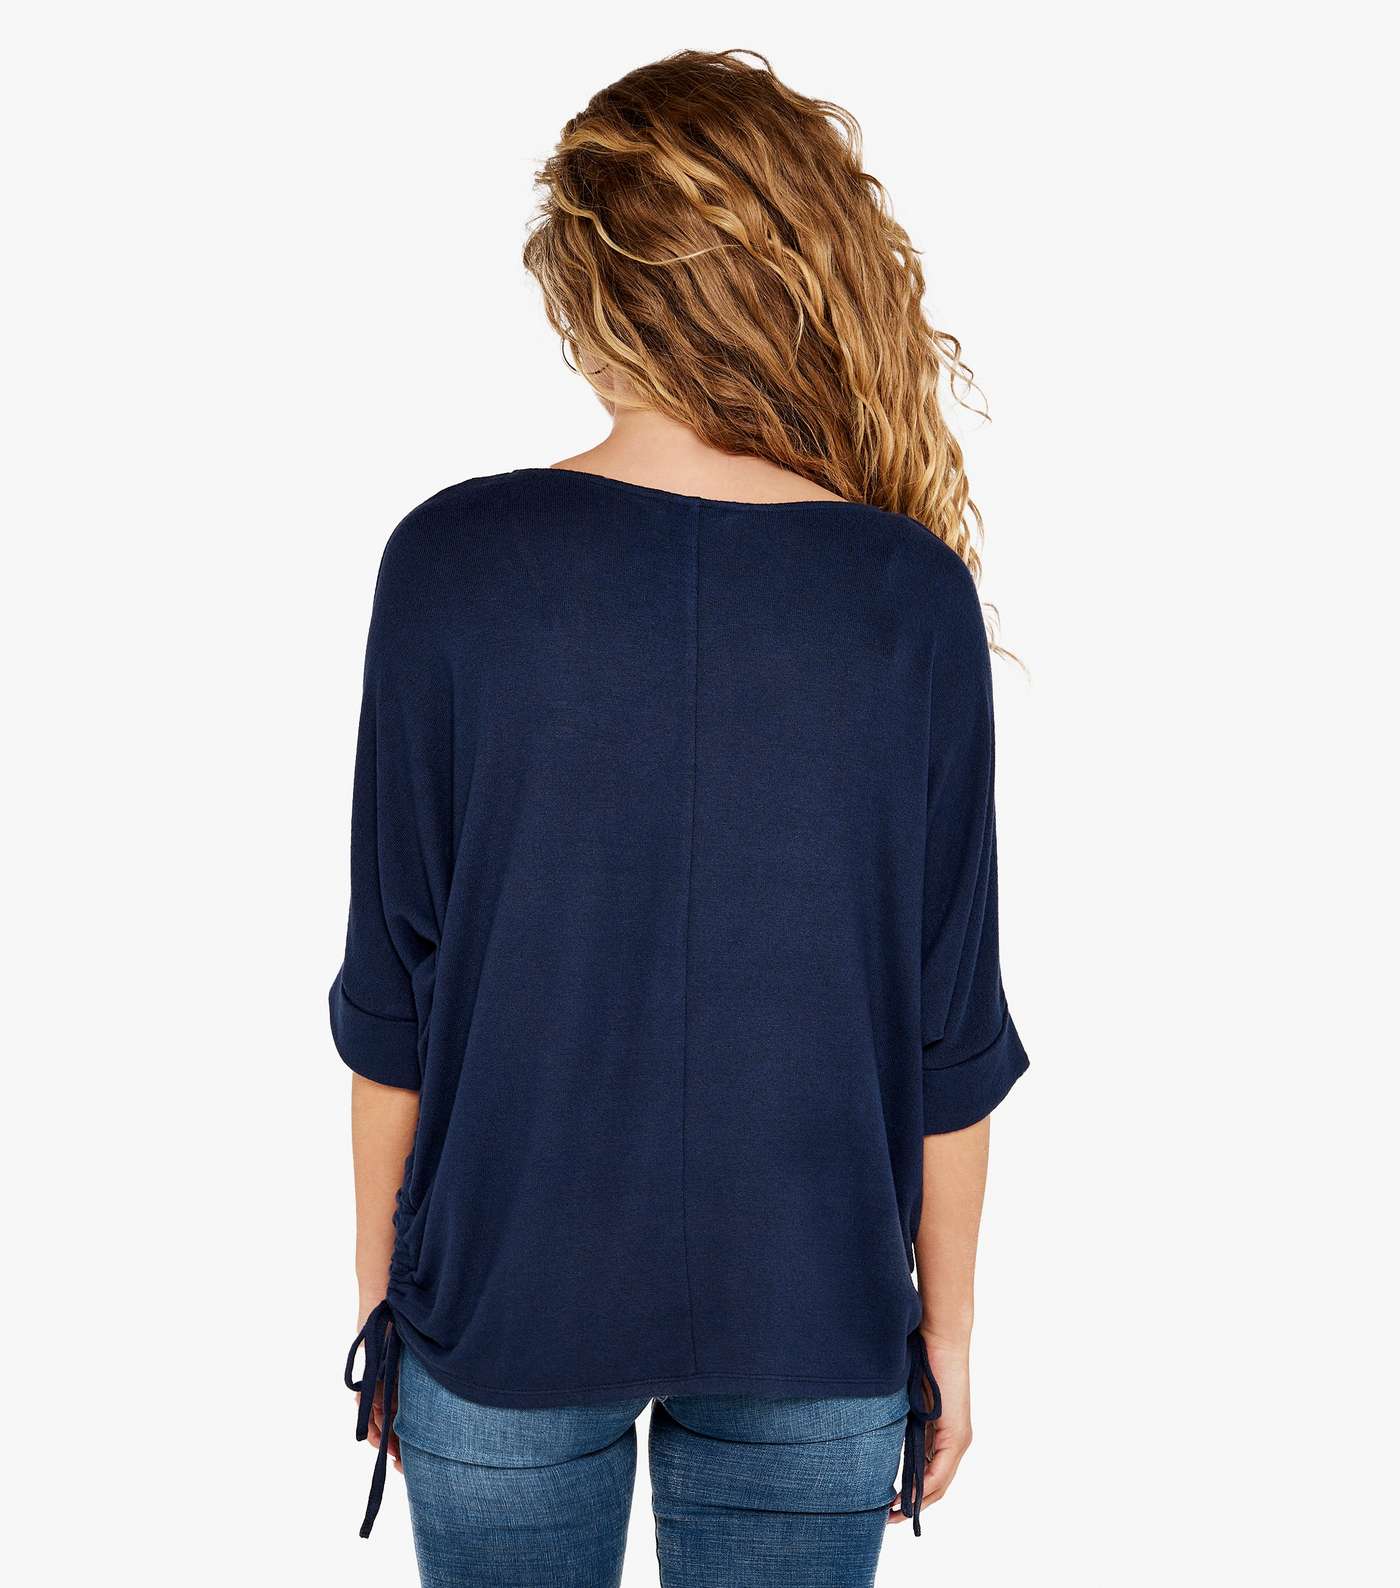 Apricot Navy Soft Touch Ruched Side Batwing Top Image 3